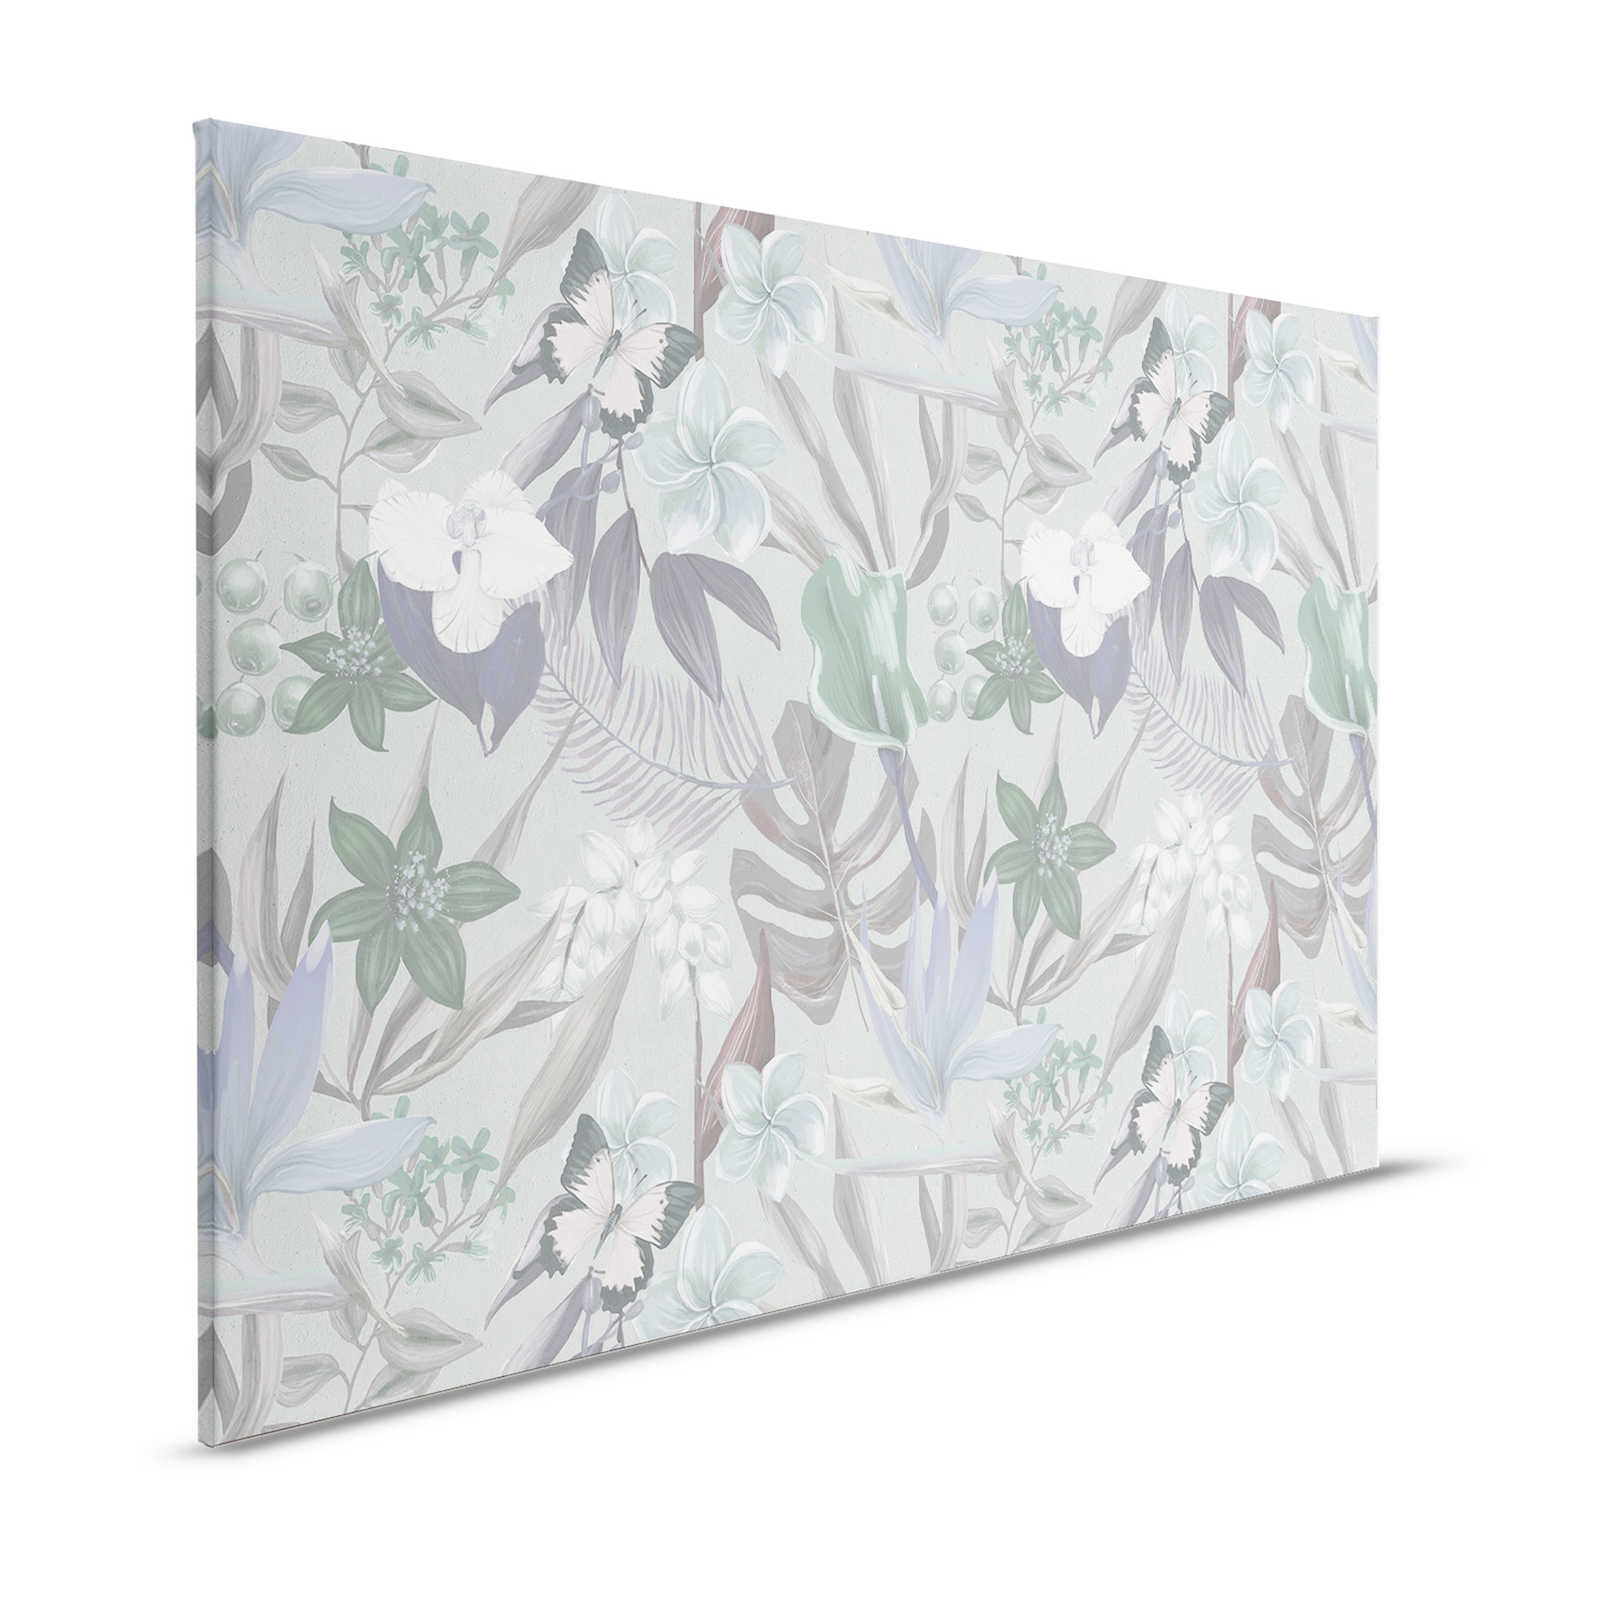 Floral Jungle Canvas Painting drawn | green, white - 1.20 m x 0.80 m
